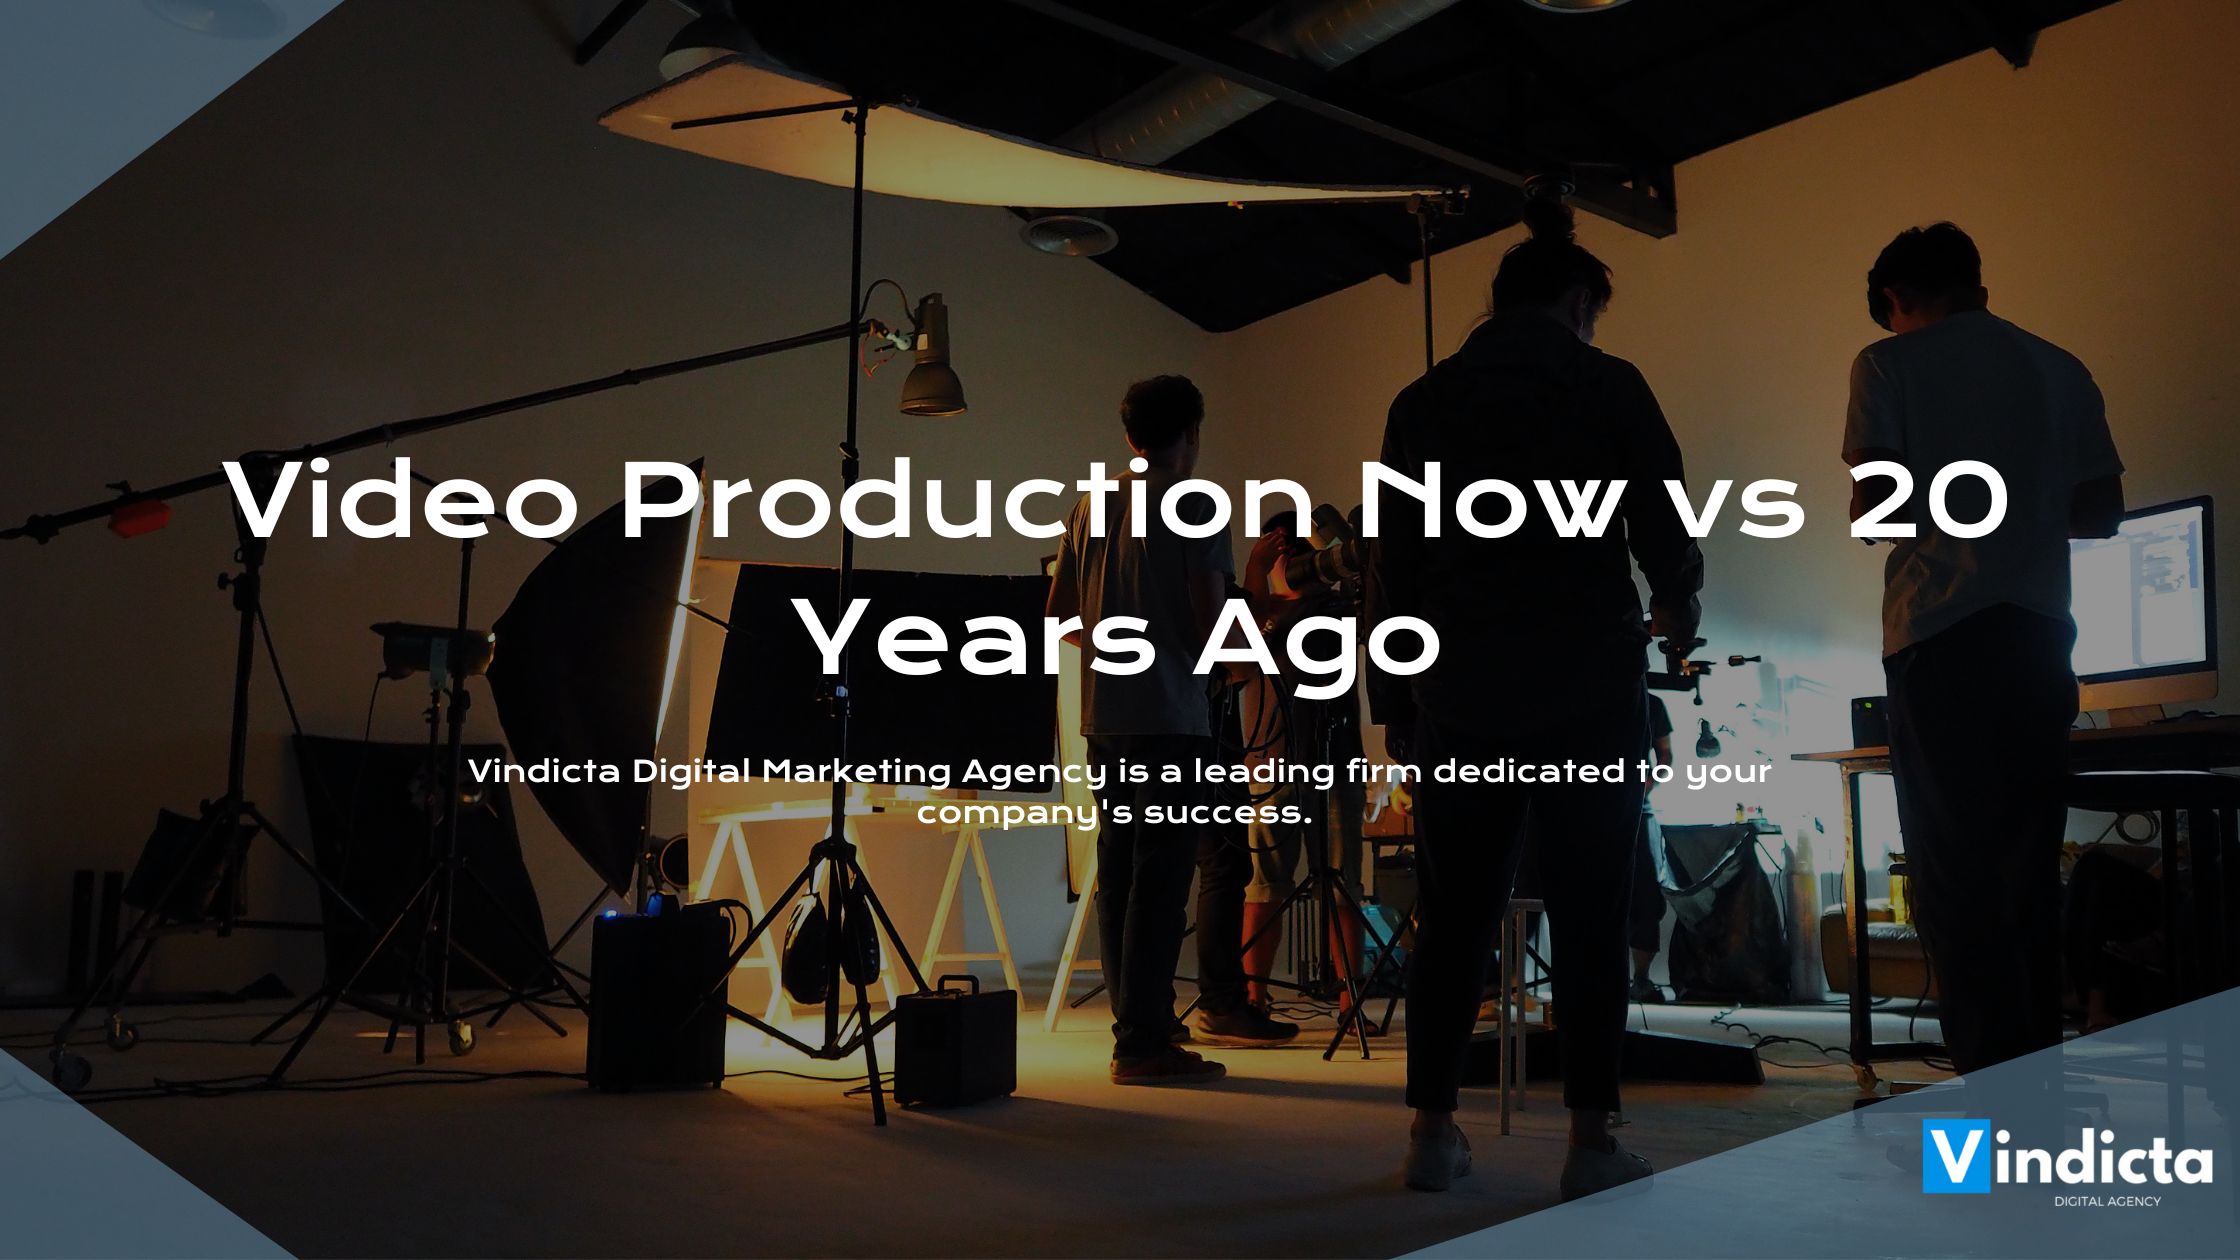 Video Production Now vs 20 Years Ago